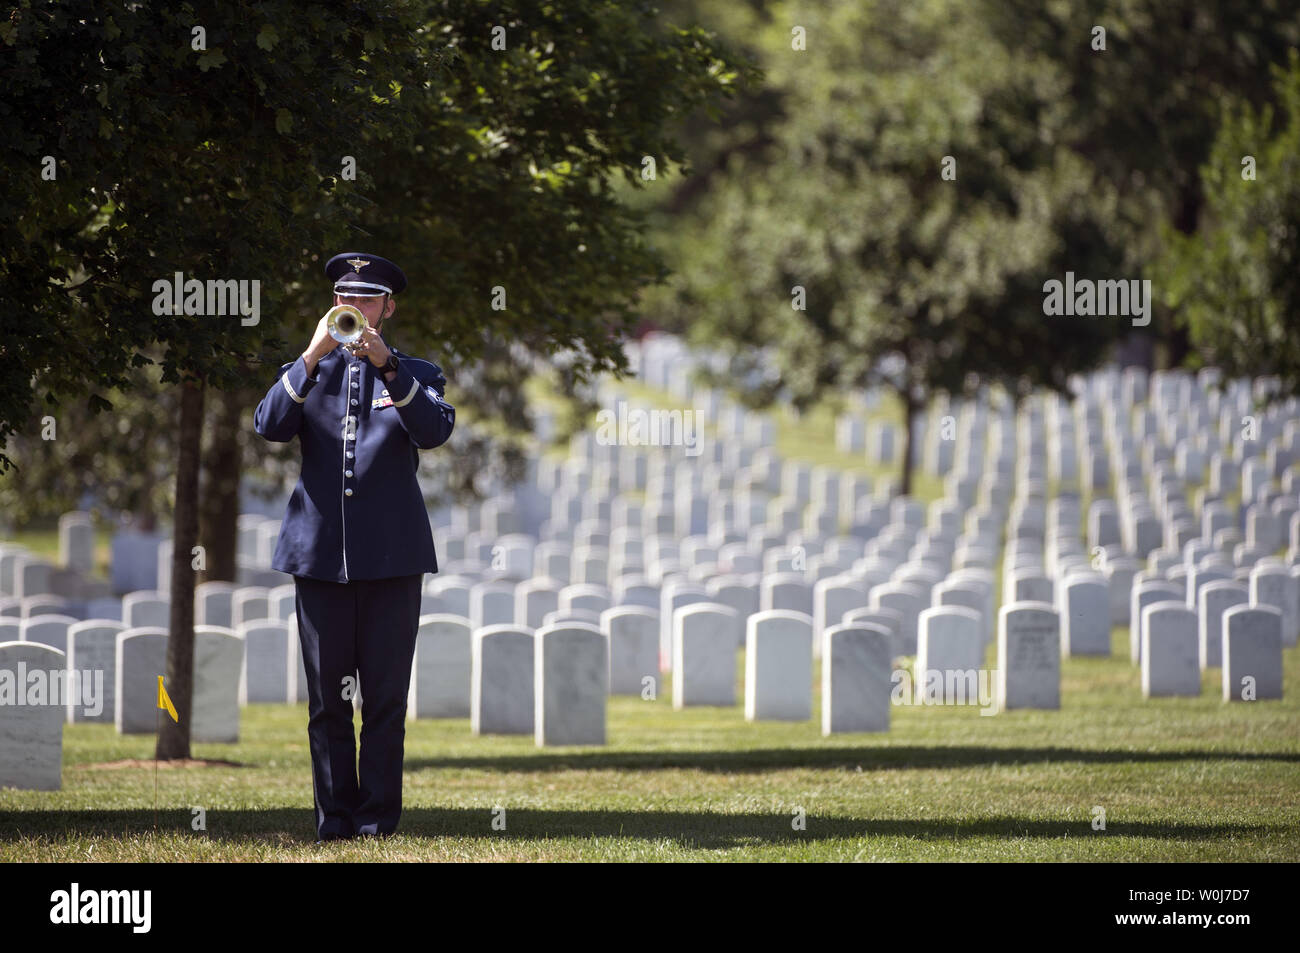 An Air Force Honor Guard bugler plays Taps during the funeral service for U.S. Air Force 2nd Lt., Malvin Greston 'Mal' Whitfield, at Arlington National Cemetery in Arlington, Virginia on June 8, 2016. Whitfield served in the U.S. Army Air Forces in 1943 as a member of the Tuskegee Airmen and was also a five-time Olympic medalist, including three gold. Photo by Kevin Dietsch/UPI Stock Photo